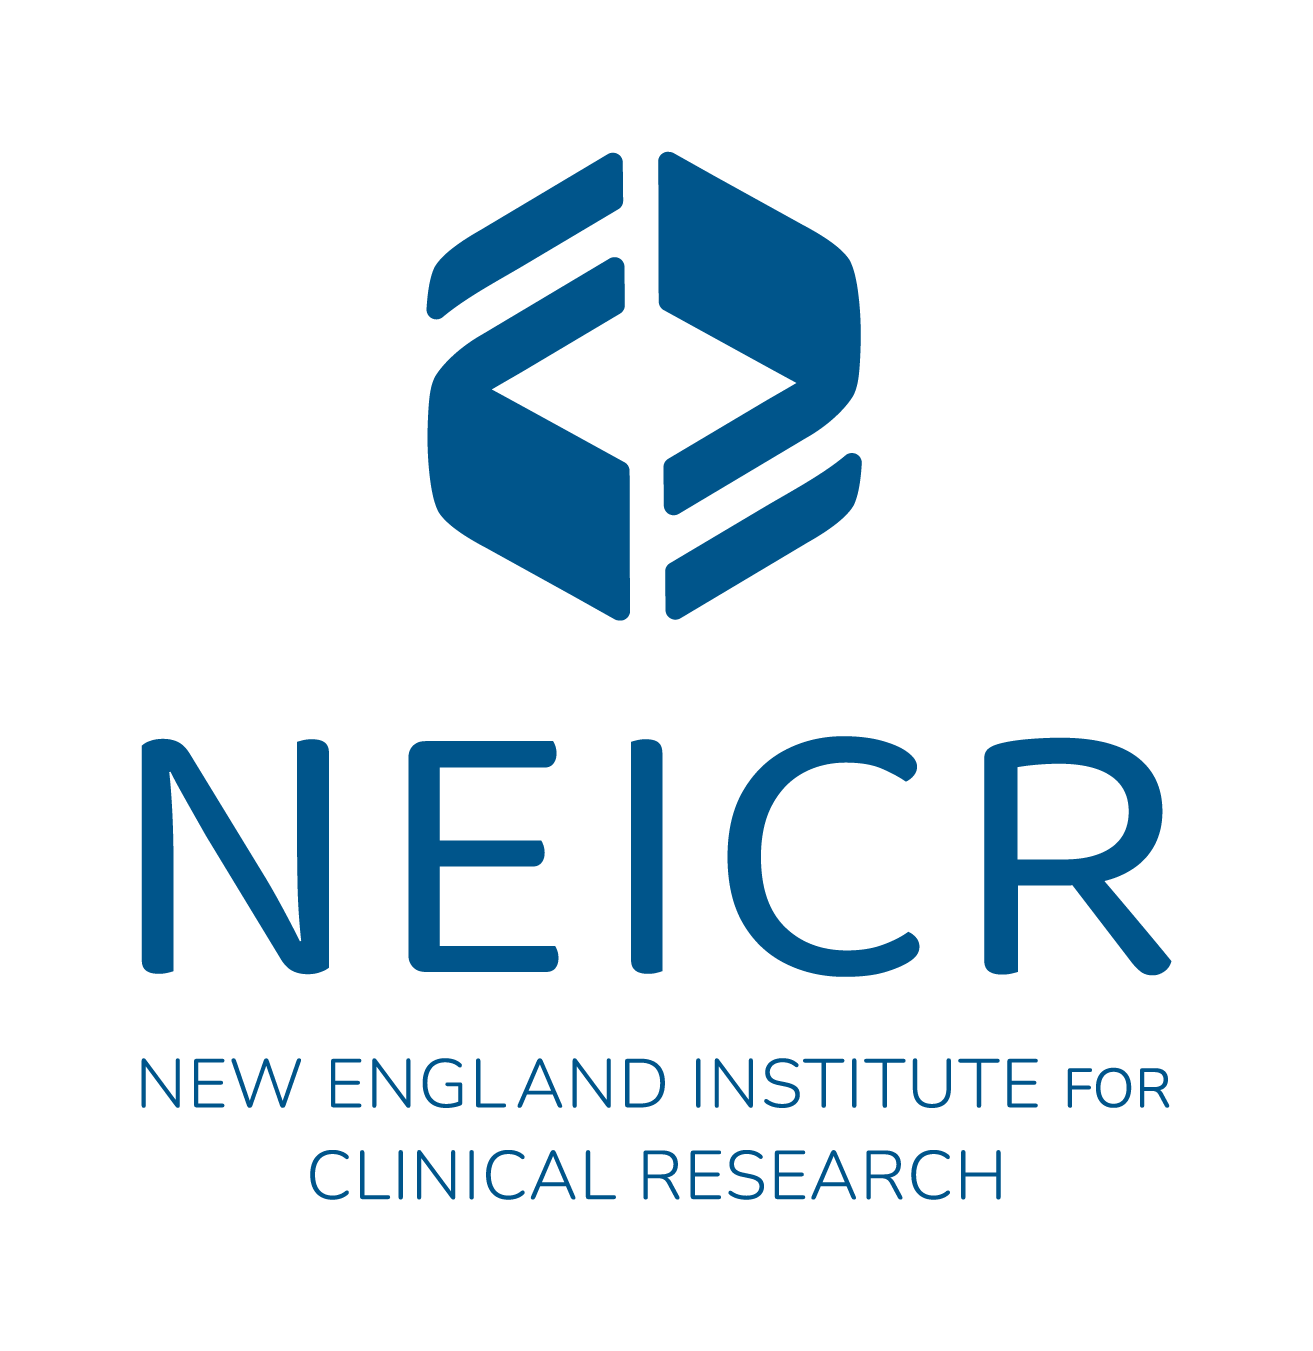 New England Institute for Clinical Research (NEICR)